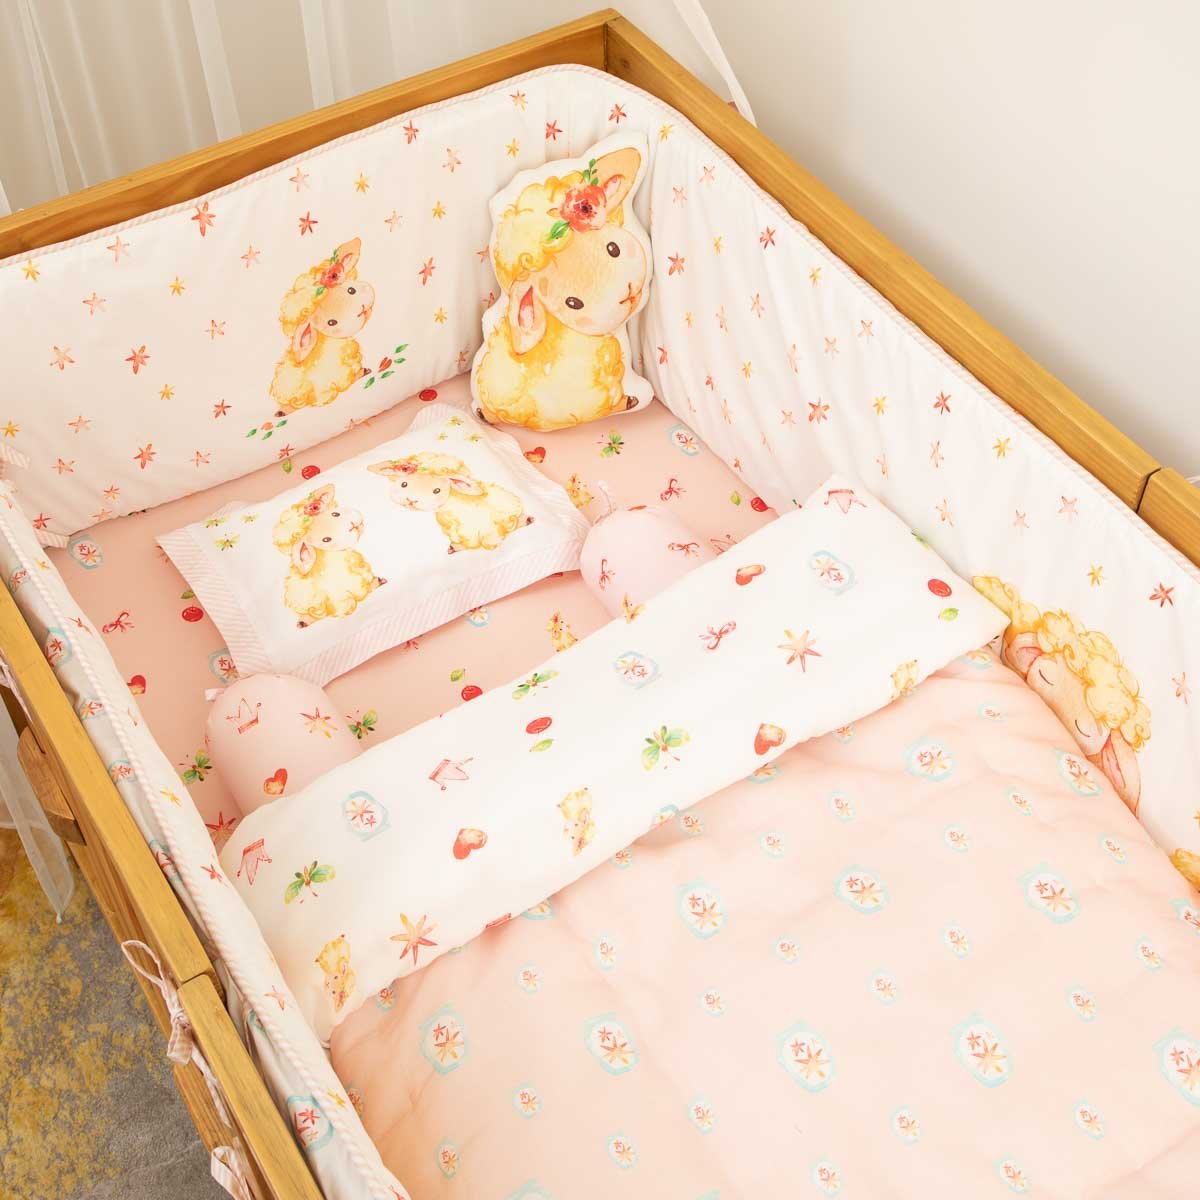 Fluffy the Sheep - Cot Bedding Set with Bumper - Pink